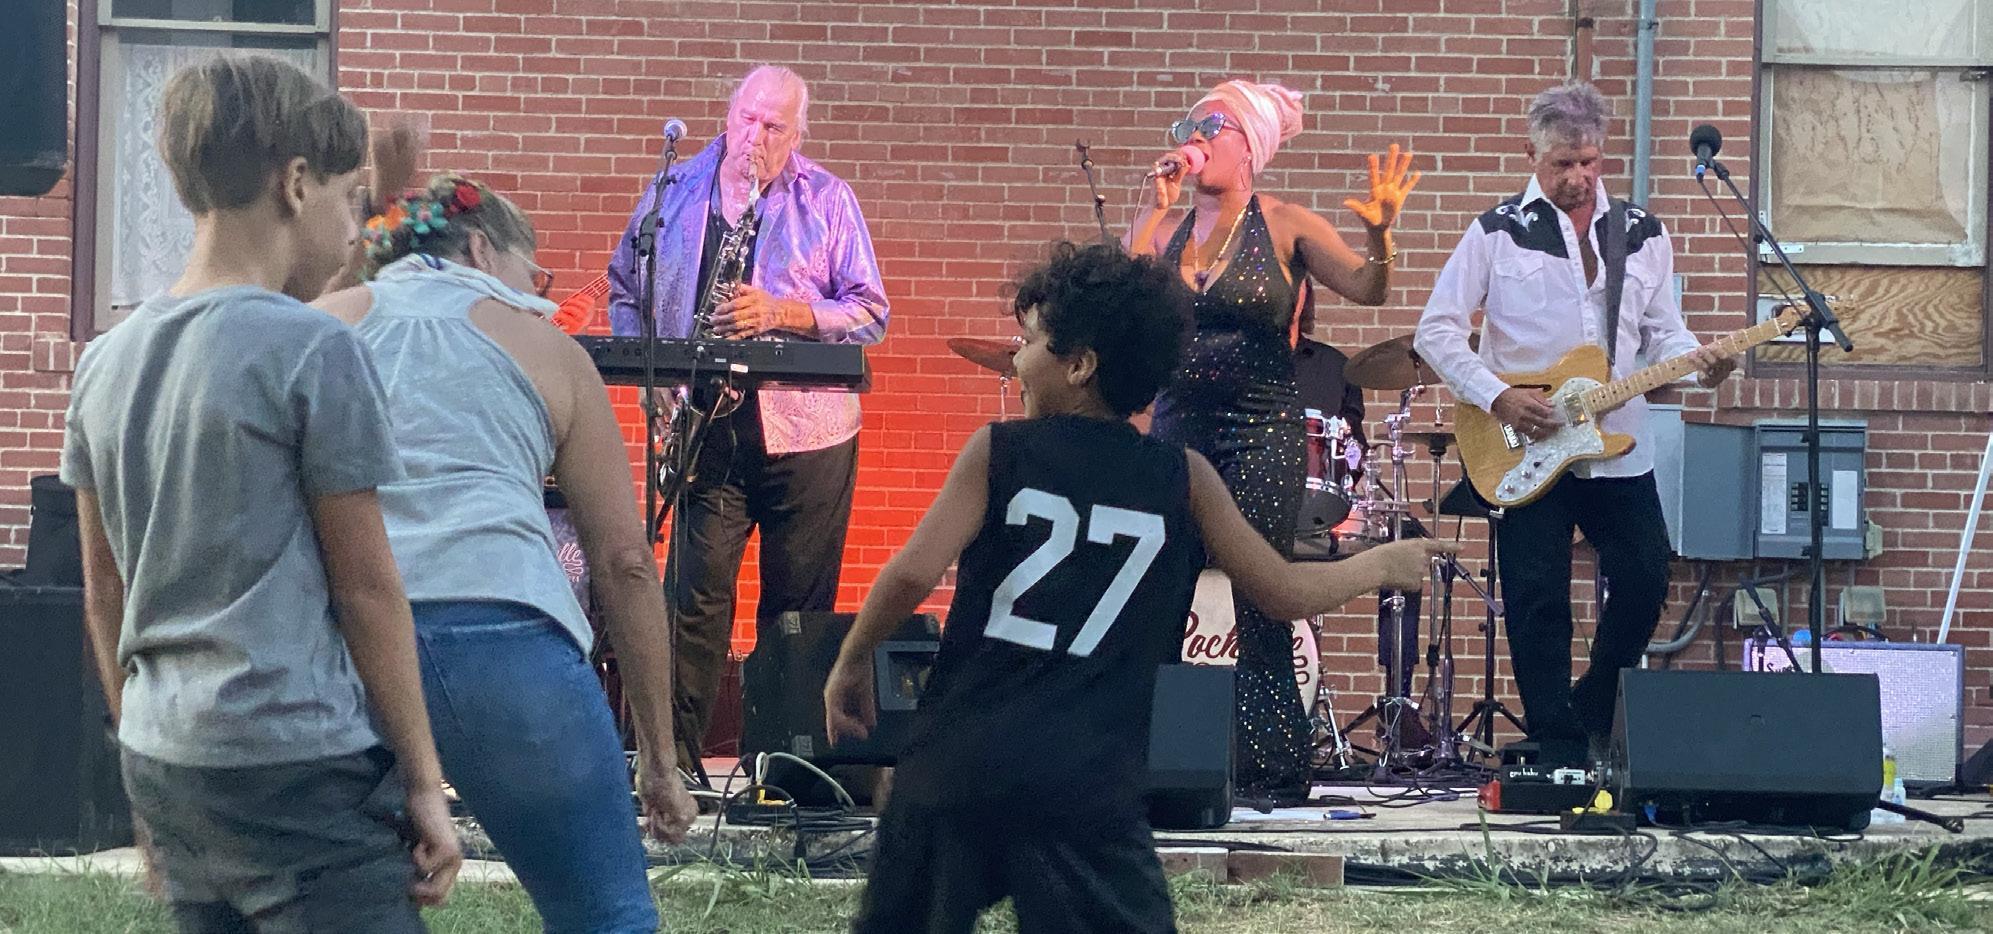 'Tammi Fest' in Martindale offers music with a purpose